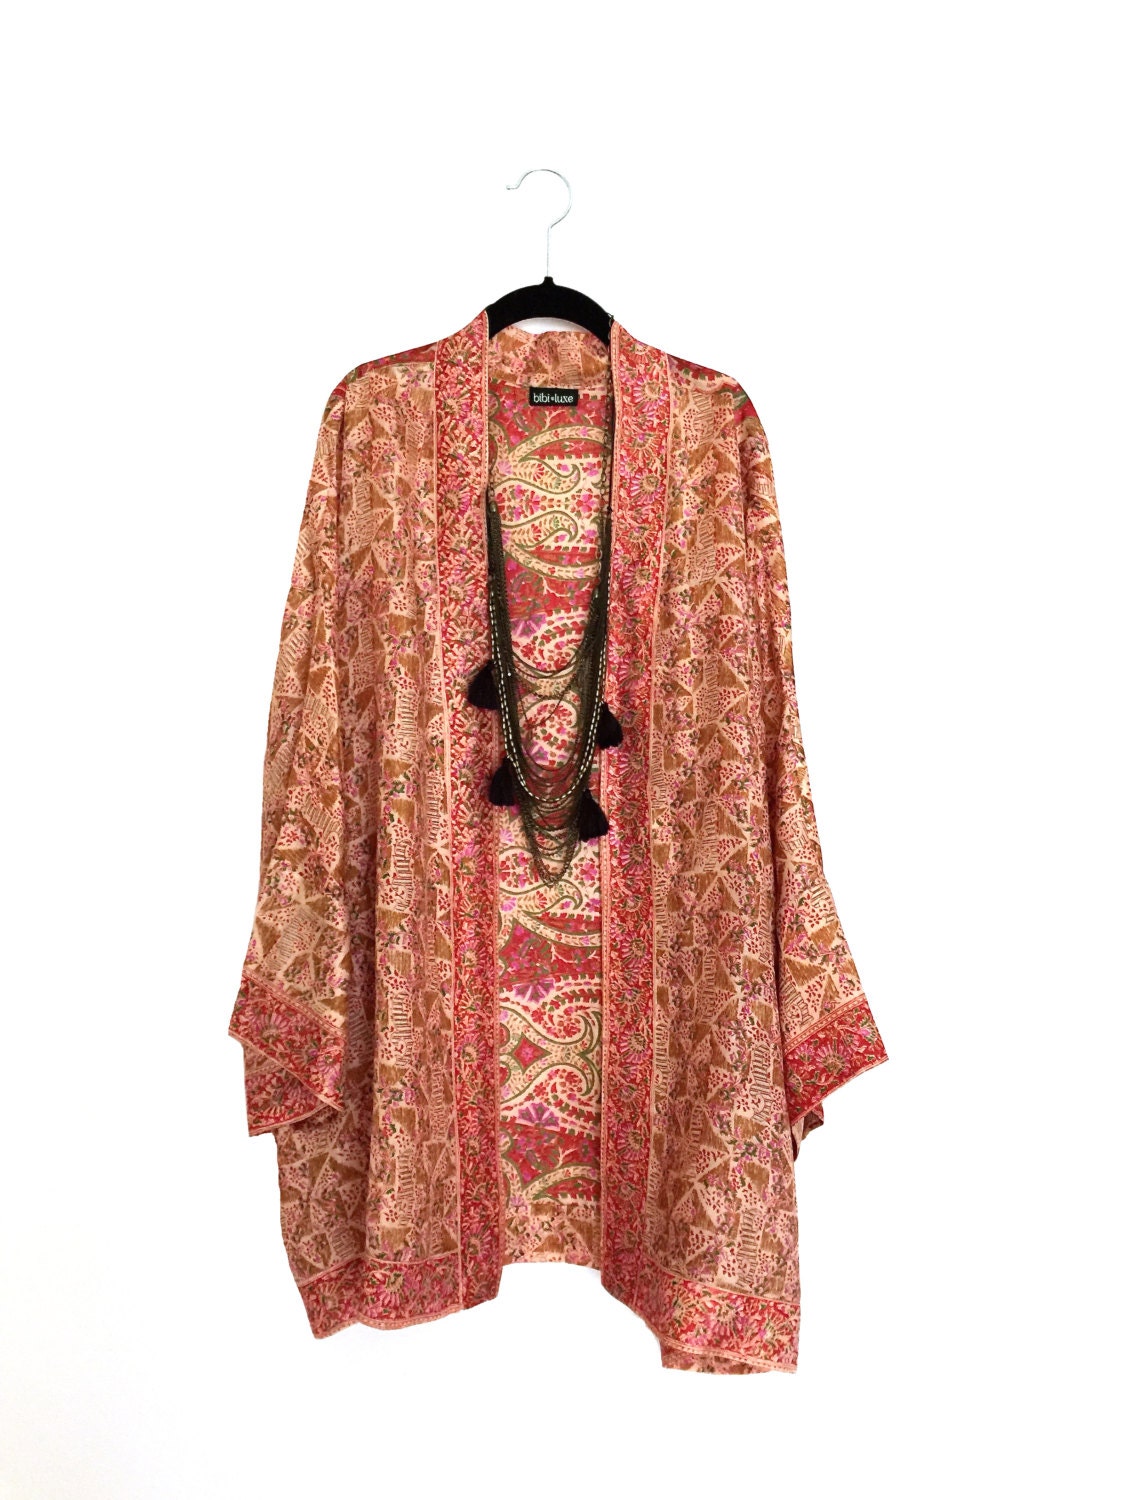 Silk Kimono jacket oversized in gold and red with indian